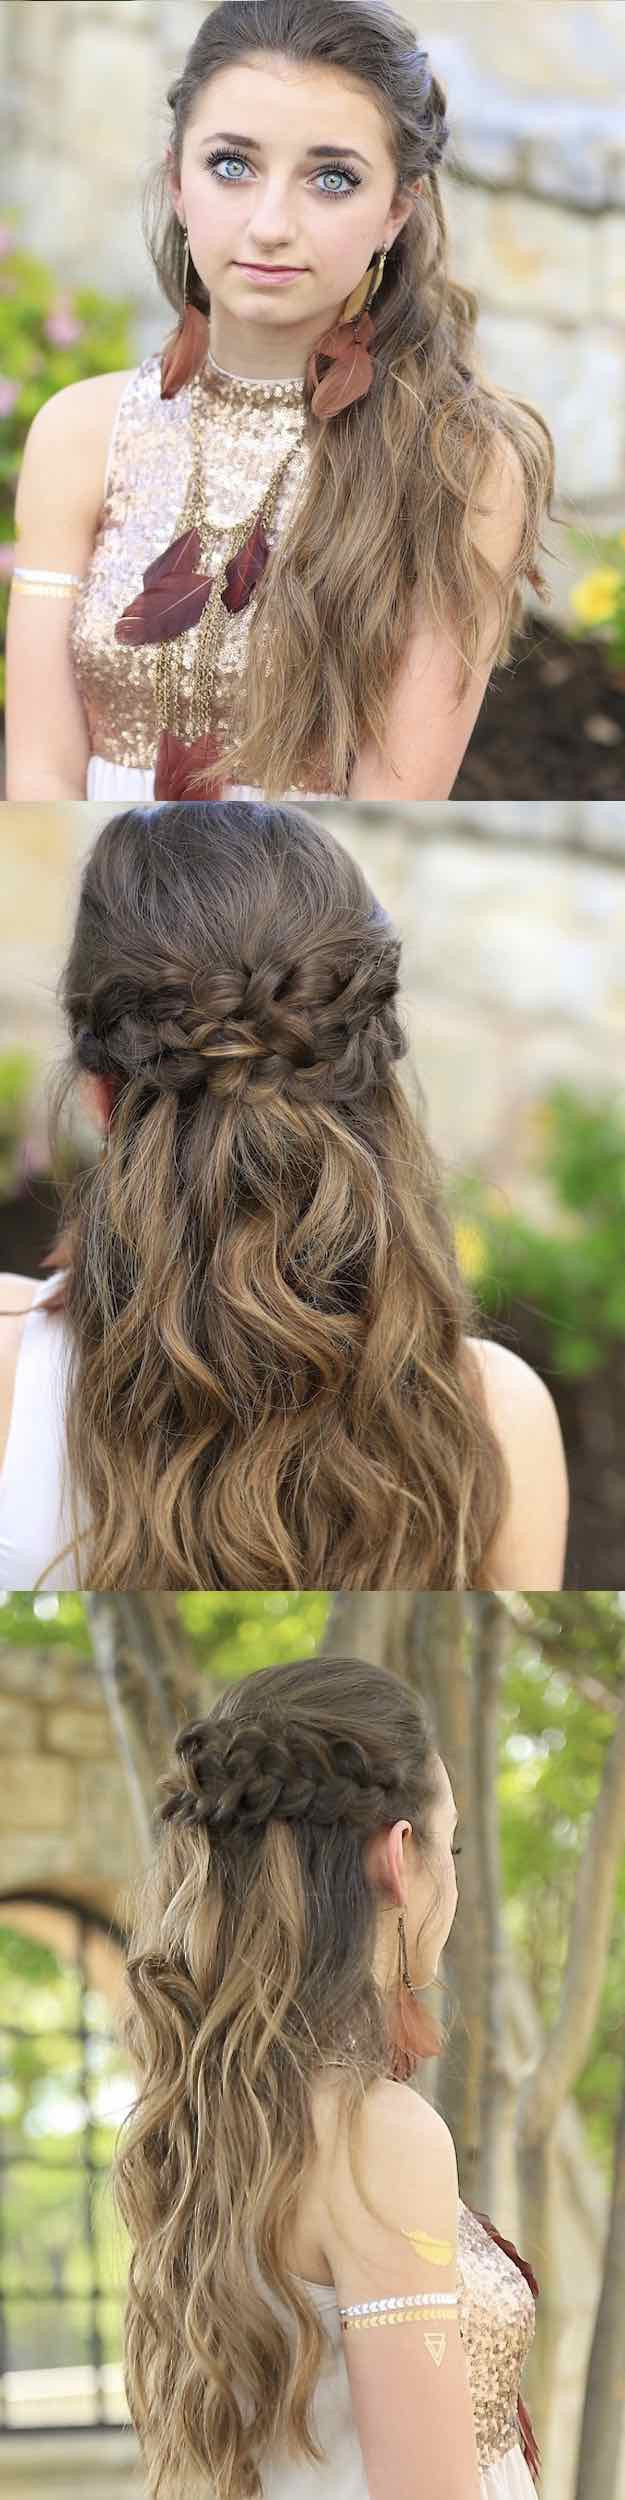 Cute Half Up Half Down Hairstyles For Prom
 25 Easy Half Up Half Down Hairstyle Tutorials For Prom